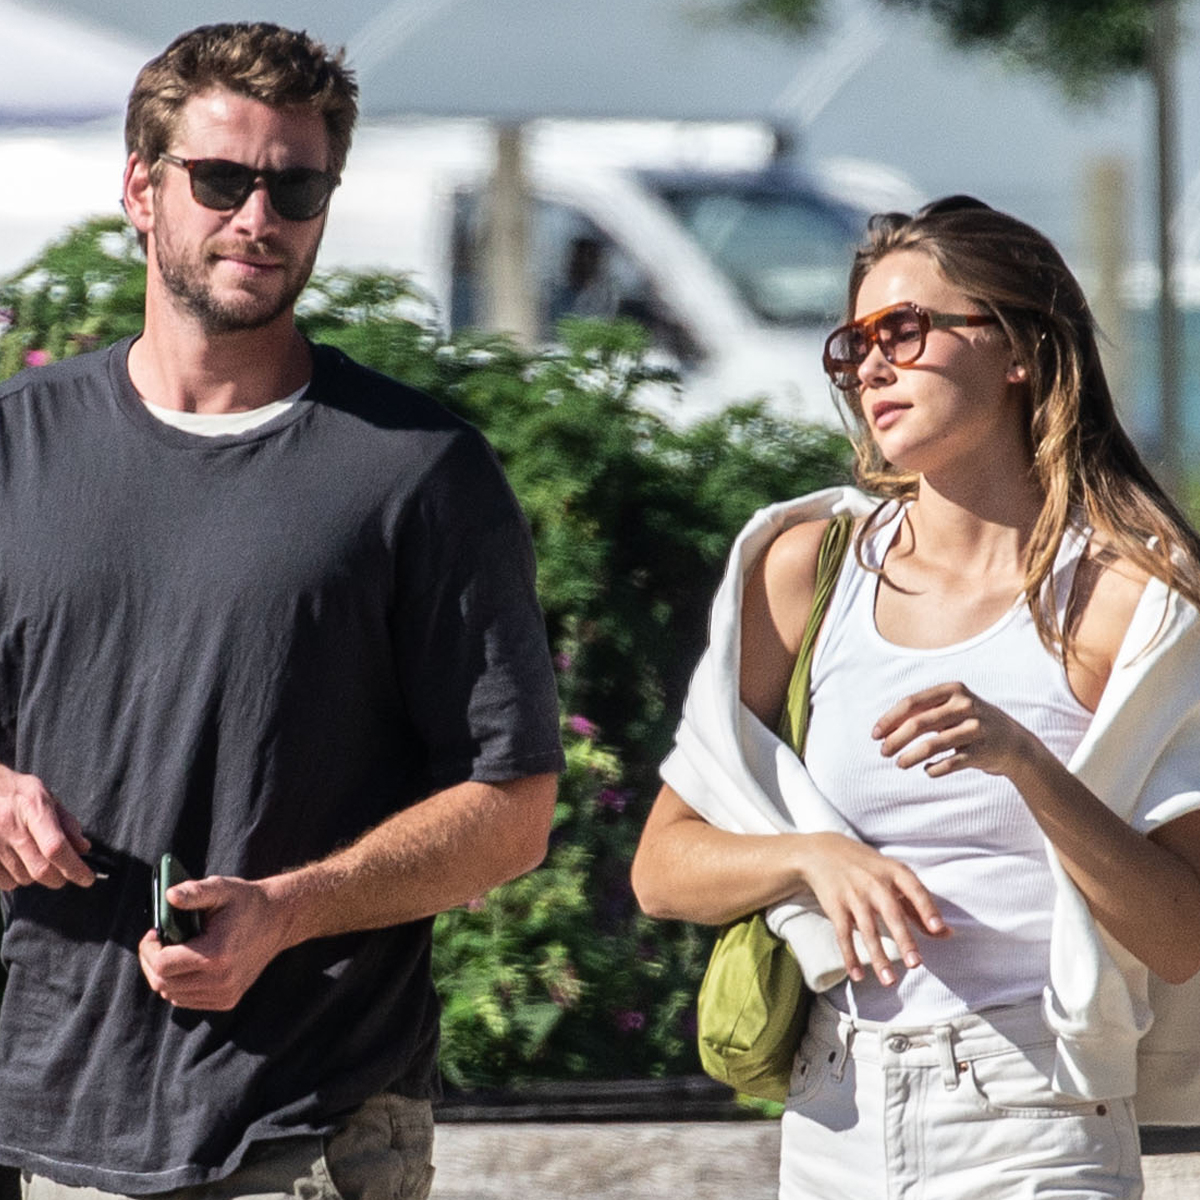 Know About Liam Hemsworth’s Girlfriend Gabriella Brooks, And Their Relationship